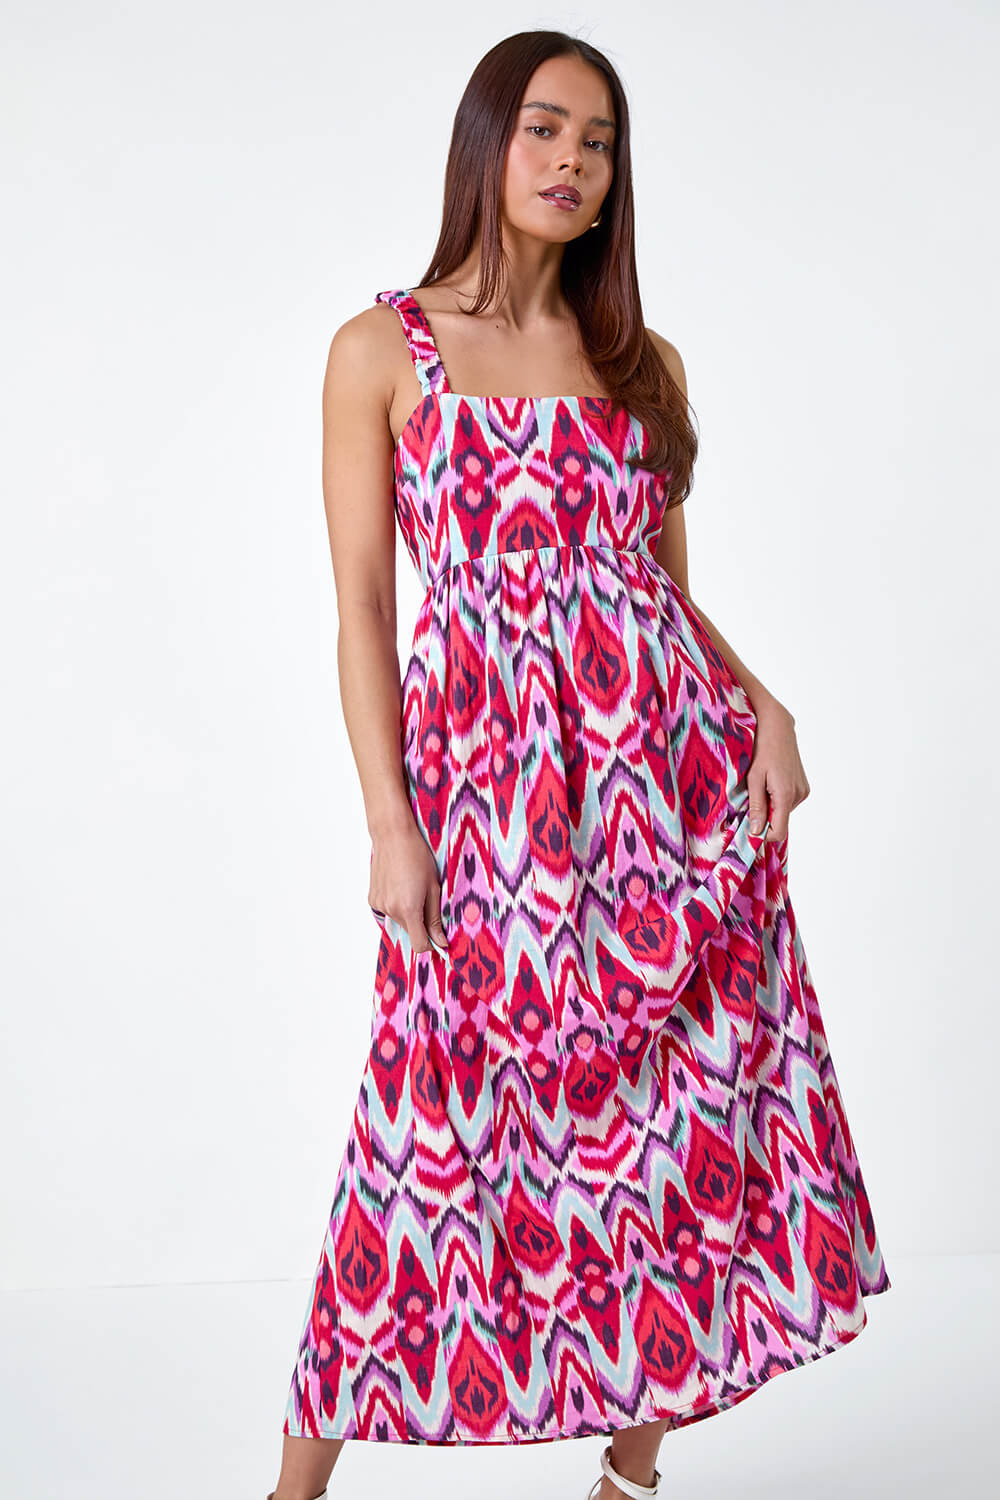 CORAL Petite Aztec Stretch Back Maxi Dress, Image 4 of 5